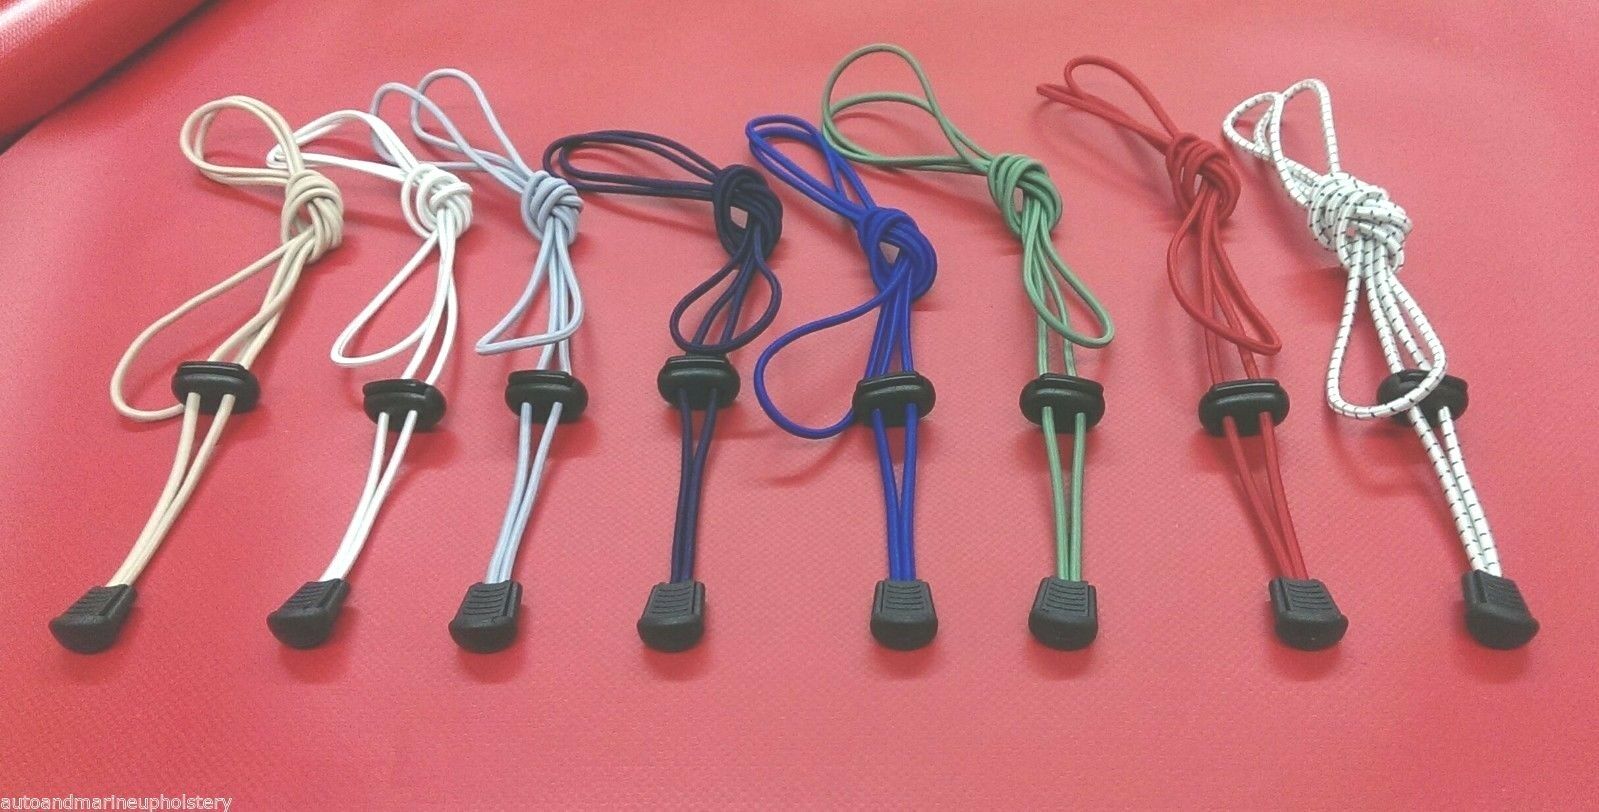 No Tie Elastic Shoelace Lock Laces Shoe Strings Fastening Sports Locking Toggle